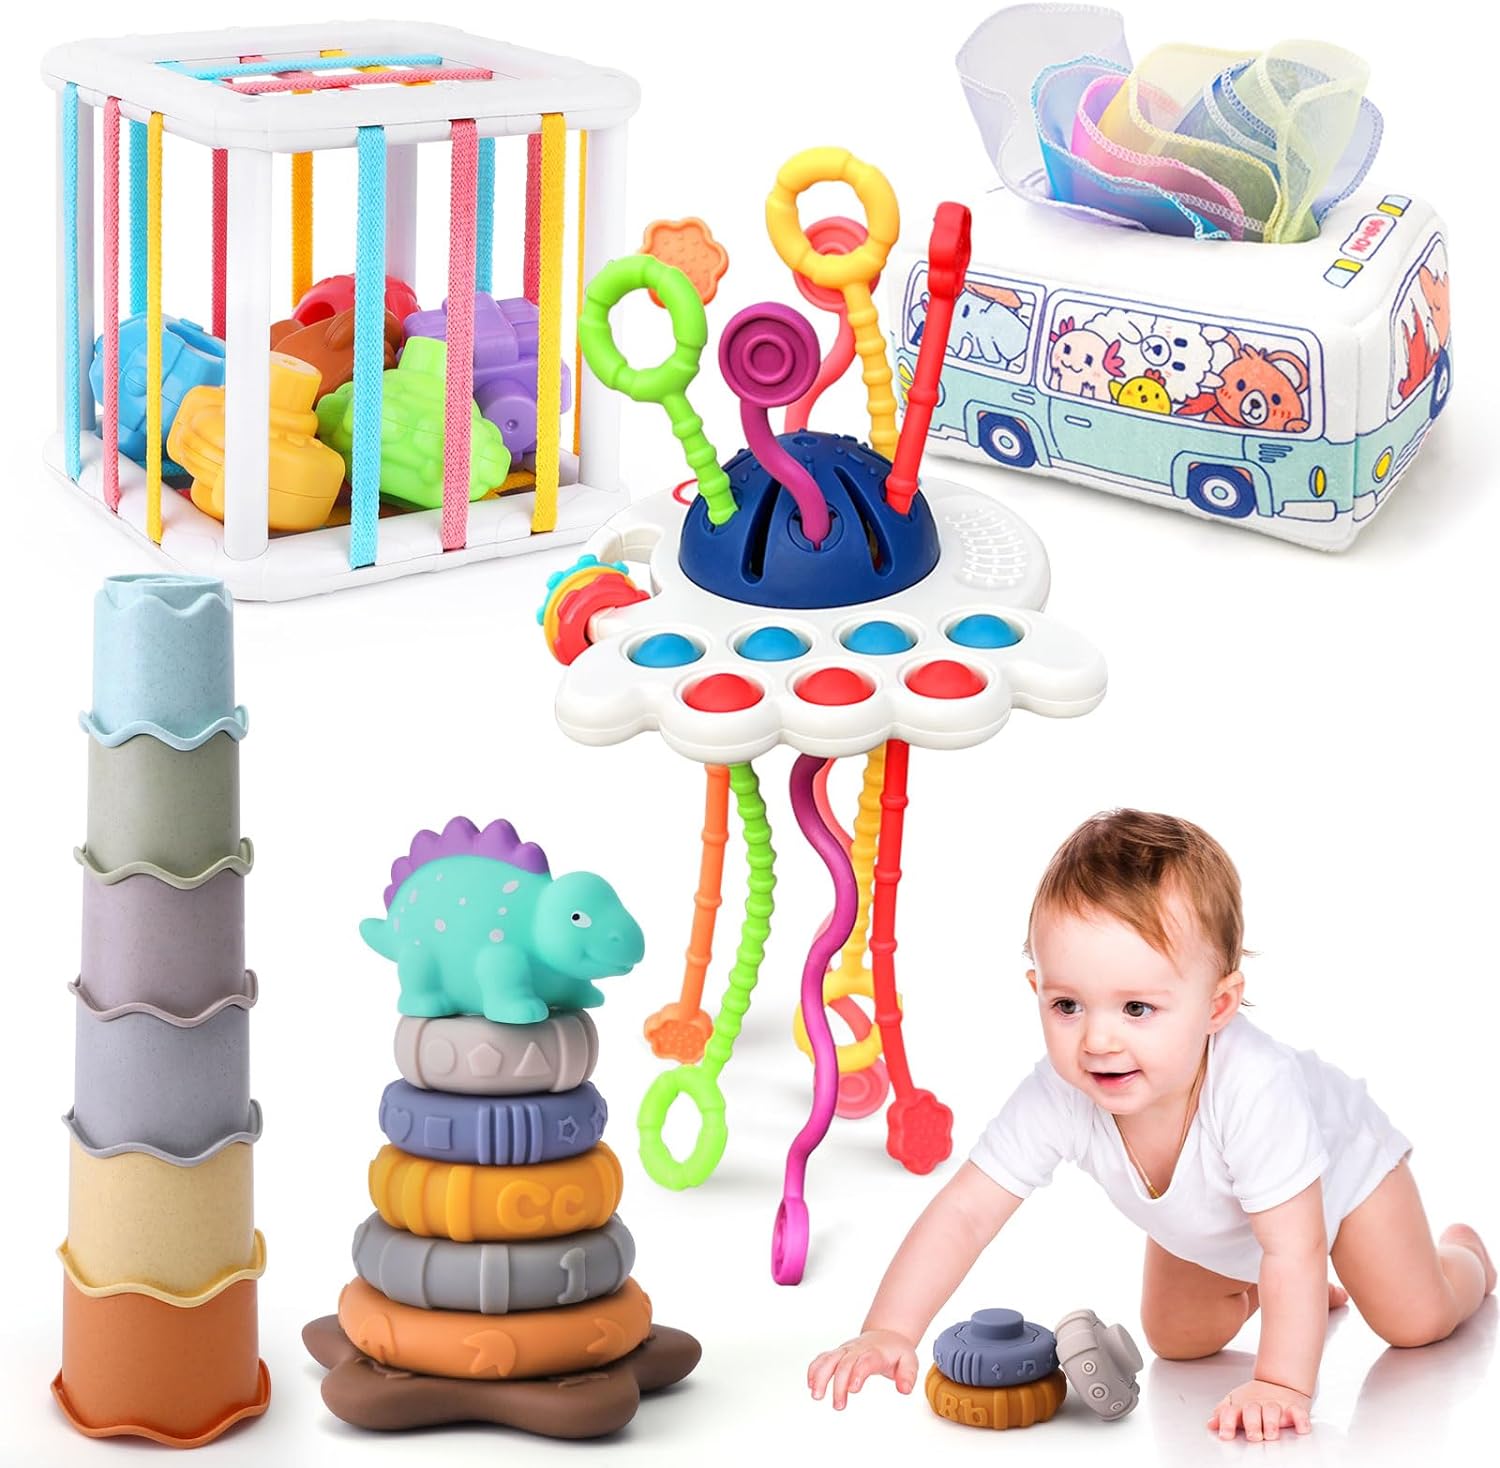 5 in 1 Baby Montessori Toys Set Include Shape Sorter Bin with Sound, Baby Tissue Box, Stacking Cups, Pull String Toy, Soft Stacking Rings, Sensory Toys for Infants Toddlers